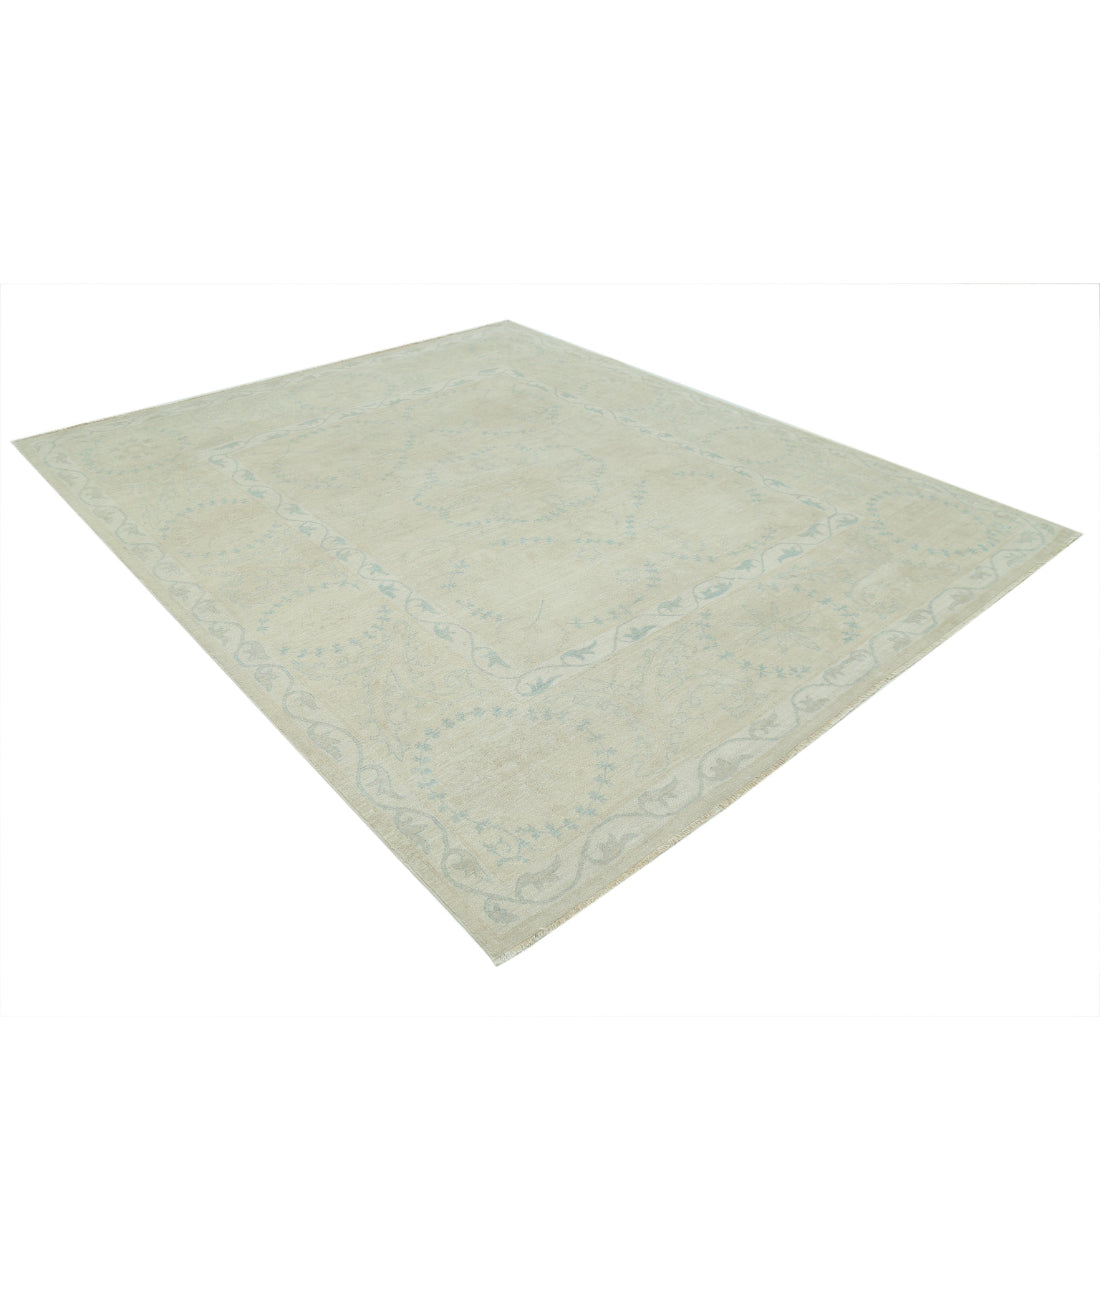 Hand Knotted Serenity Wool Rug - 7'9'' x 9'4'' 7'9'' x 9'4'' (233 X 280) / Beige / Taupe